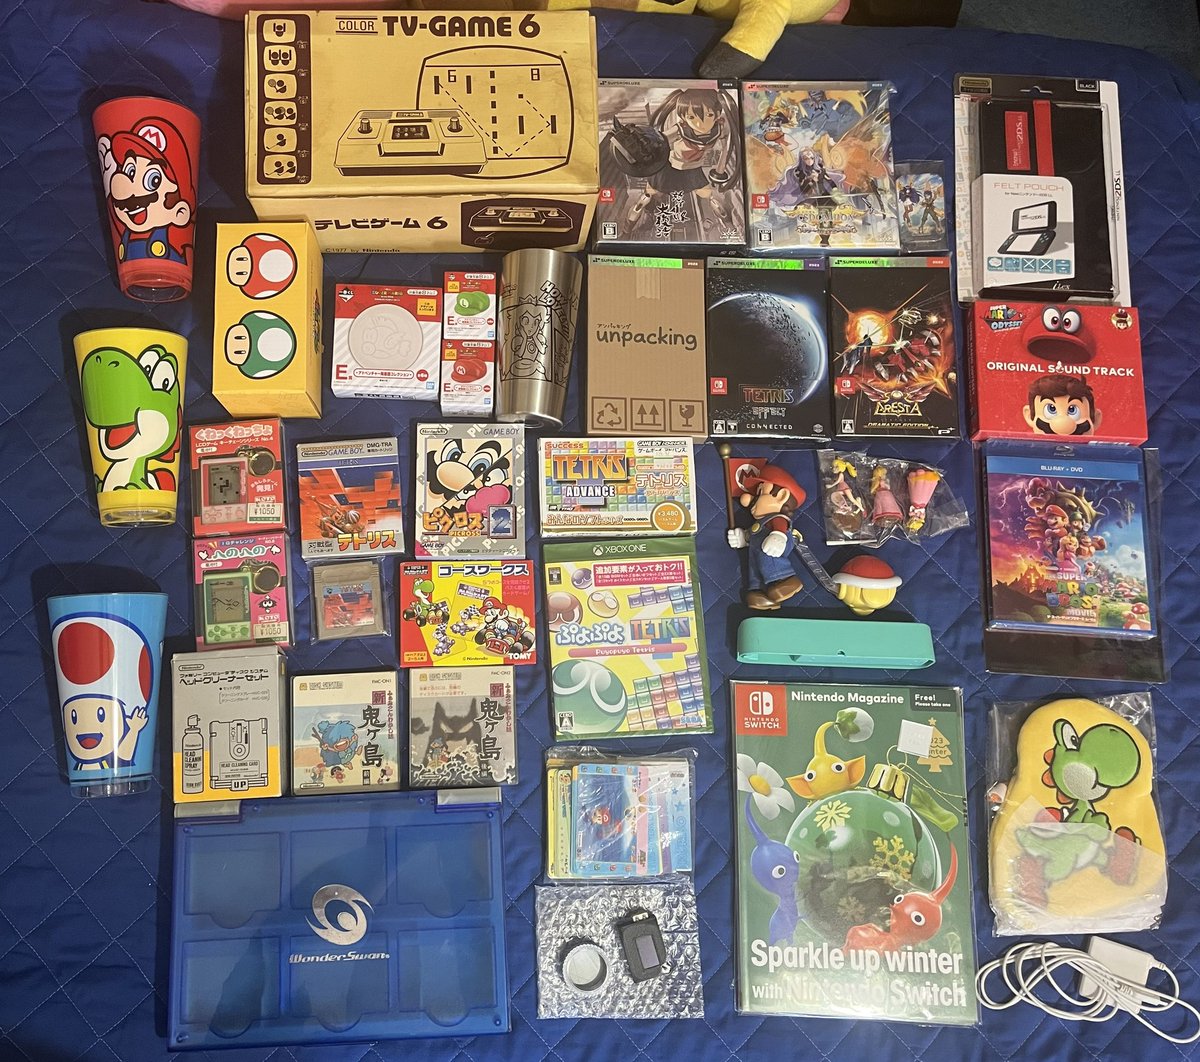 @Buyee makes getting some hard to acquire stuff a breeze. Minuet Tetris, the last 2 games Gumpei Yokoi designed, Nintendo Pong, and a bunch of Super Deluxe games.